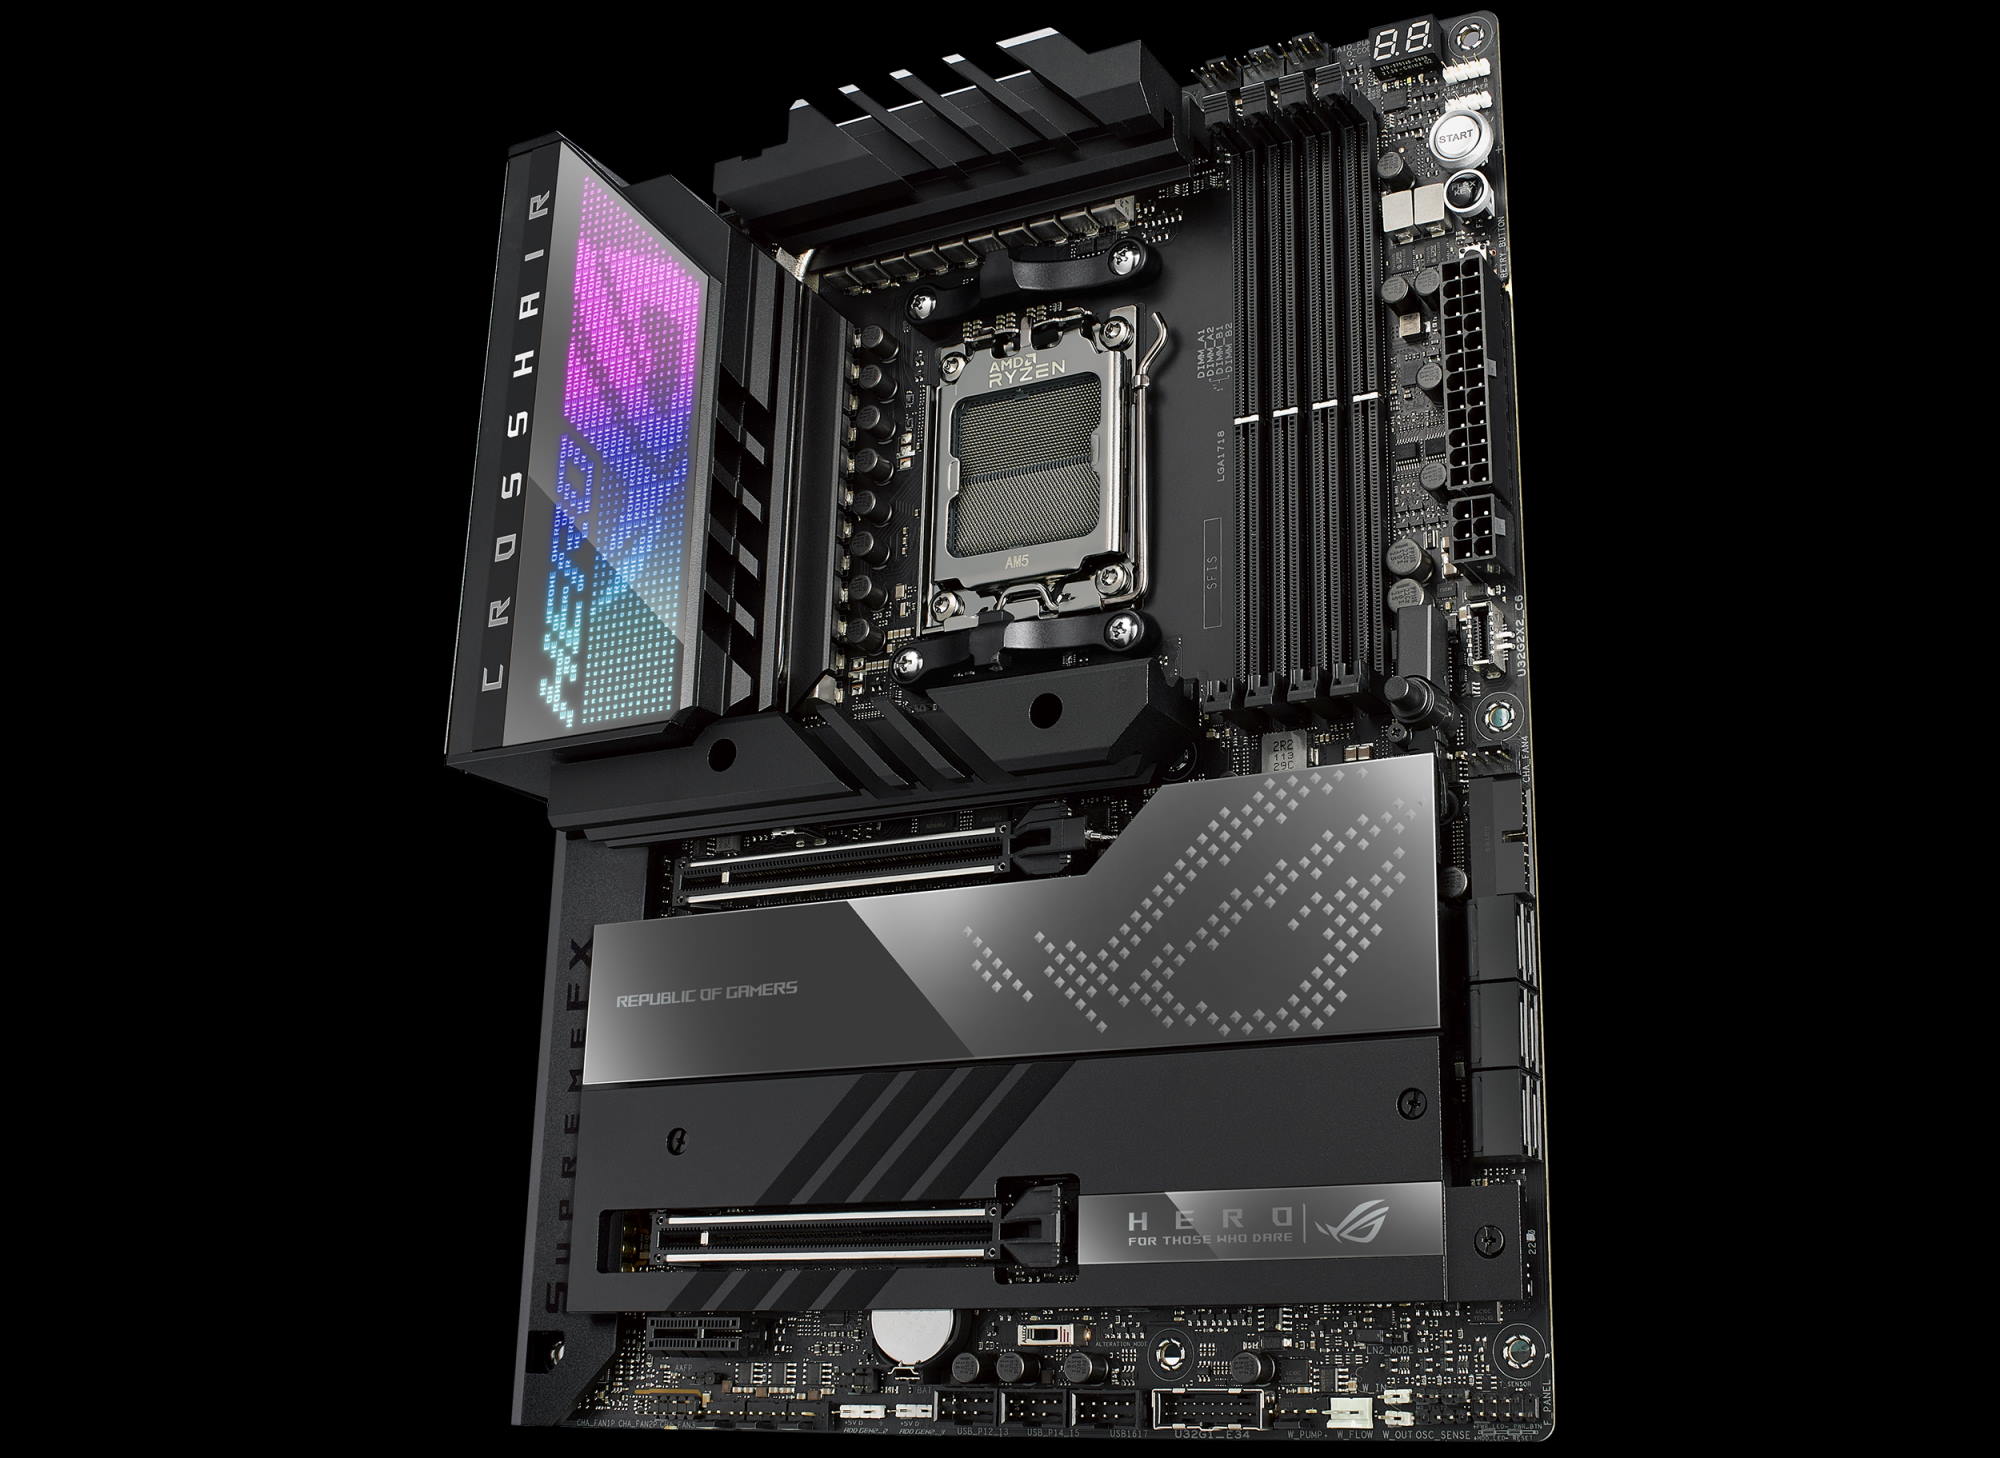 AM5 kicks off in style with ROG Crosshair and ROG Strix X670 motherboards